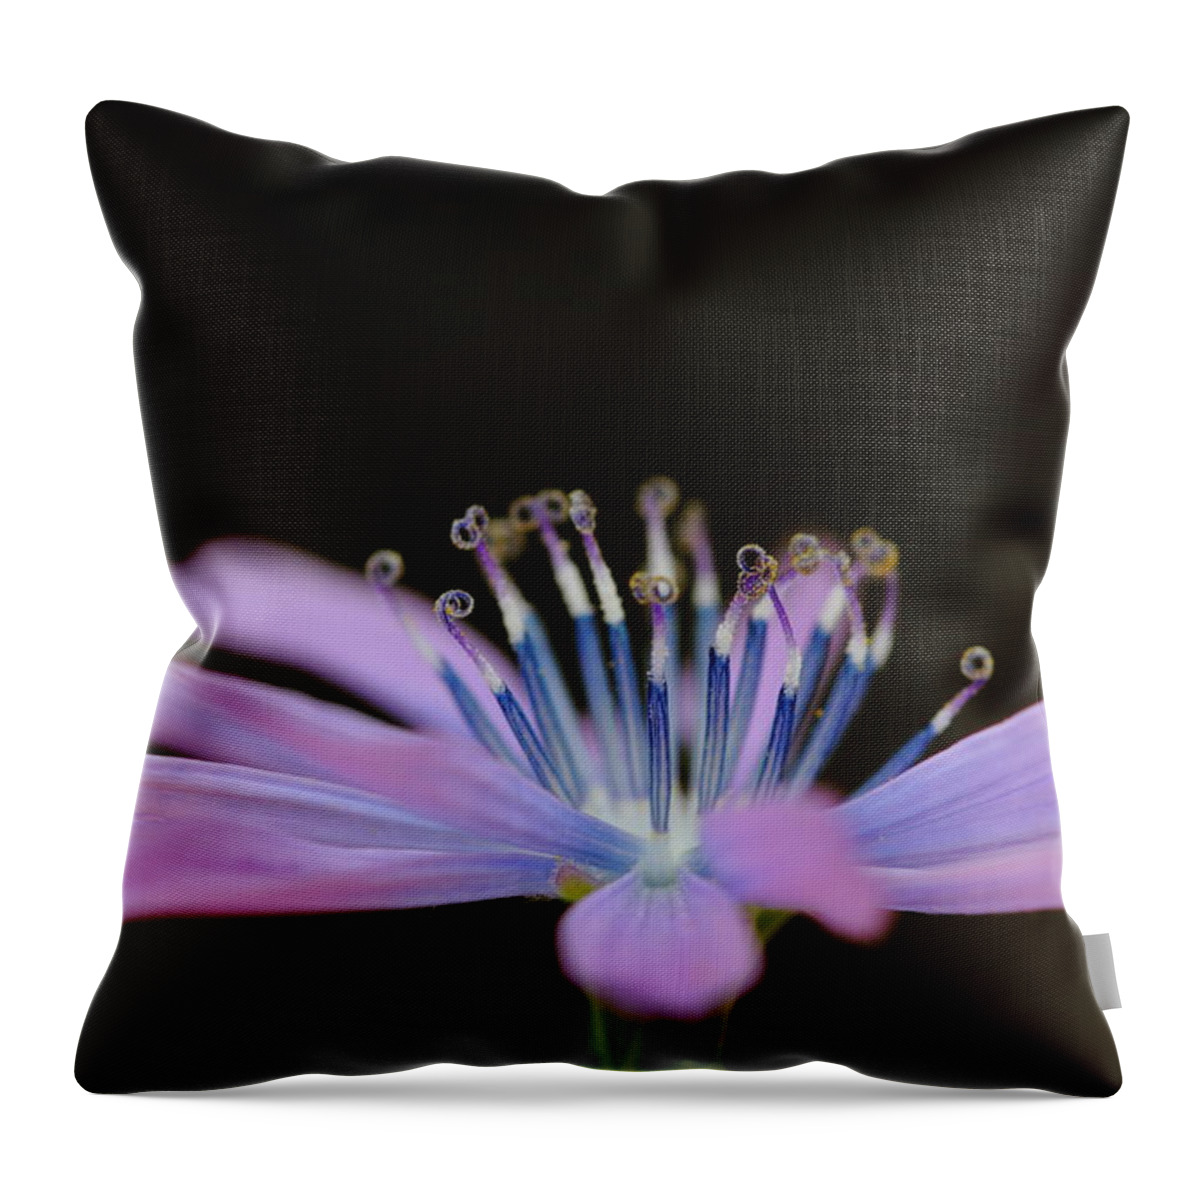 Pink Throw Pillow featuring the photograph Chicory by Richard Patmore